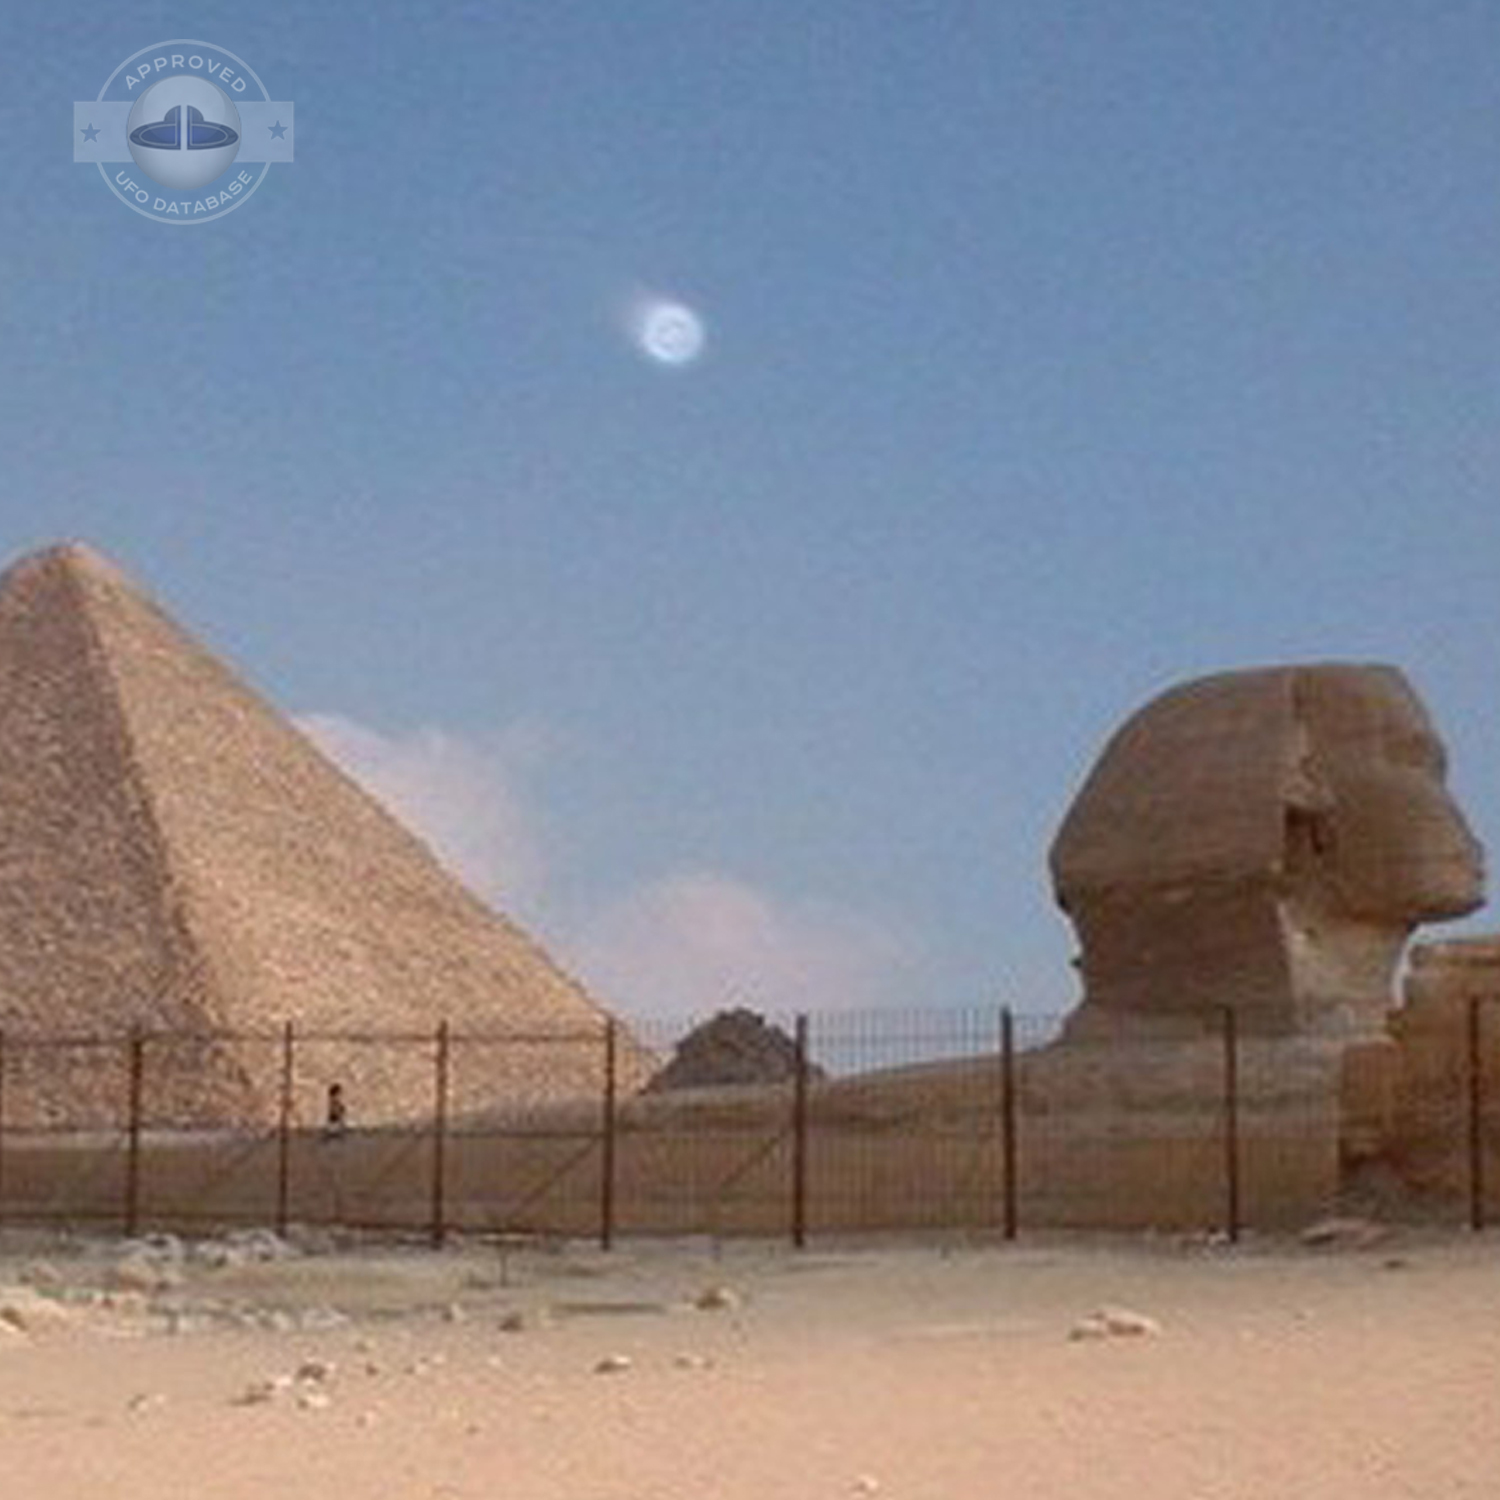 UFO picture near the famous Great Sphinx of Giza by a tourist | Egypt UFO Picture #143-3